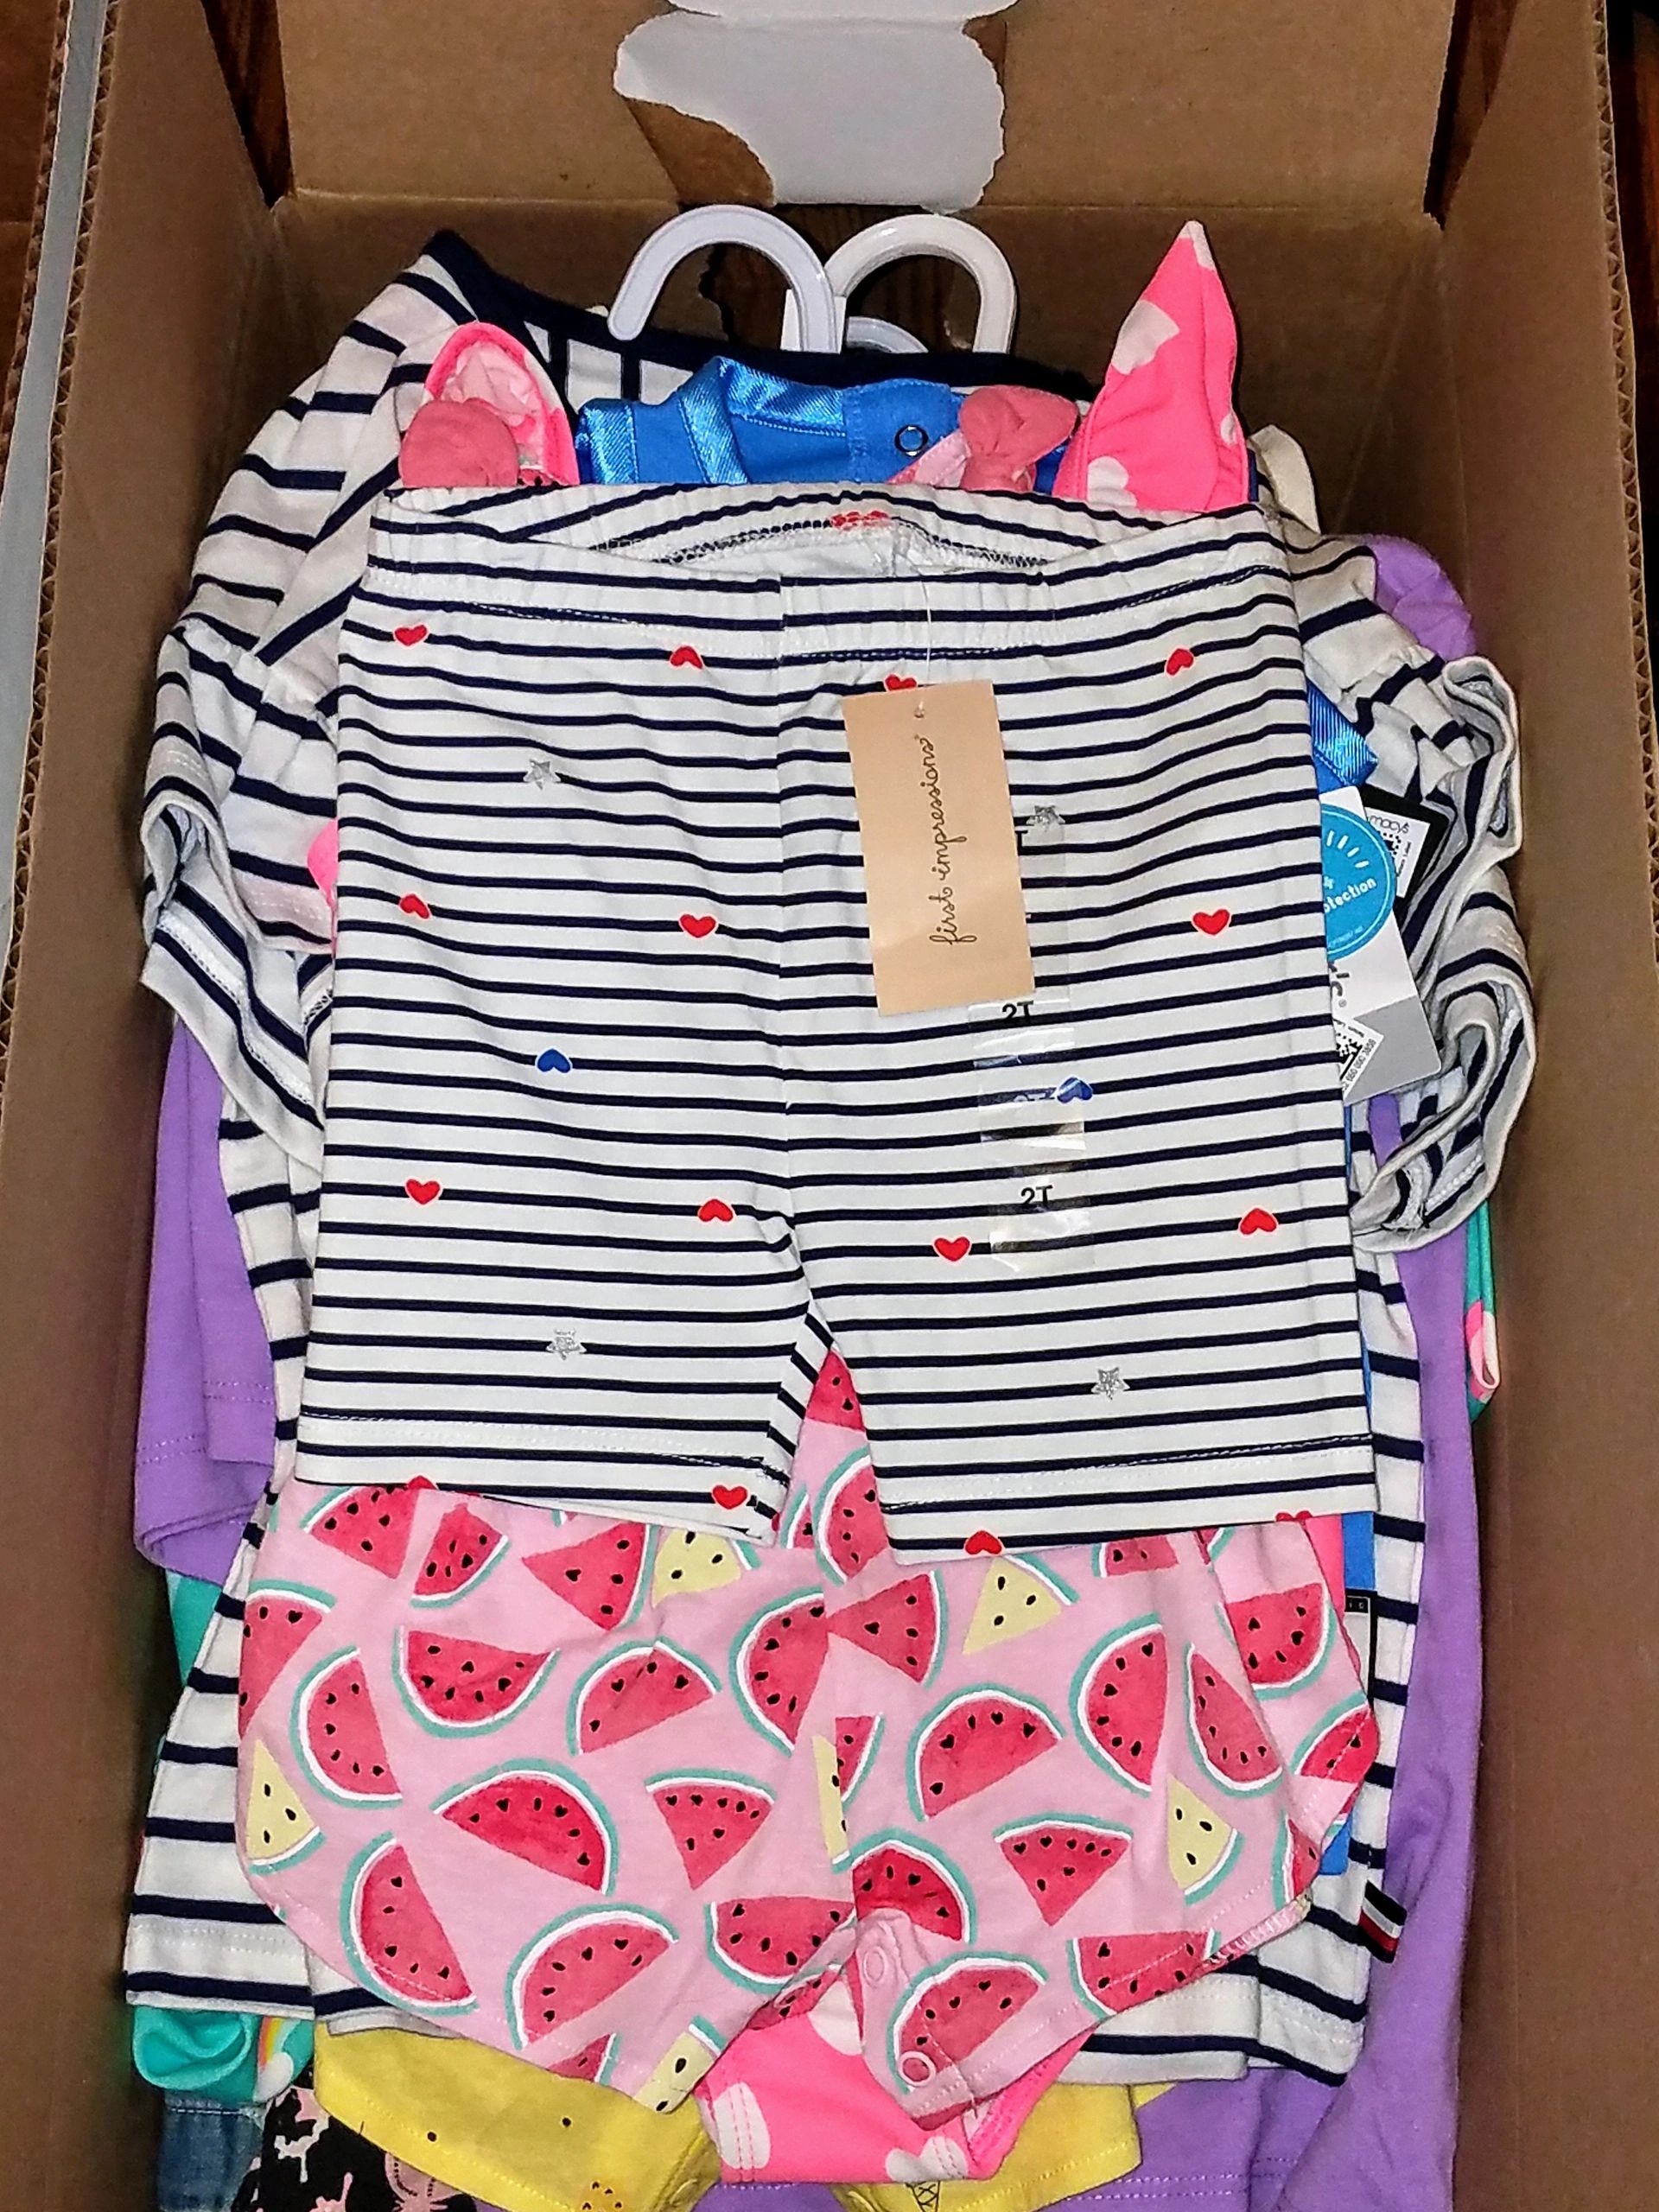 Wholesale Lots Of Brand Name Kid's Clothing | CloseoutExplosion.com